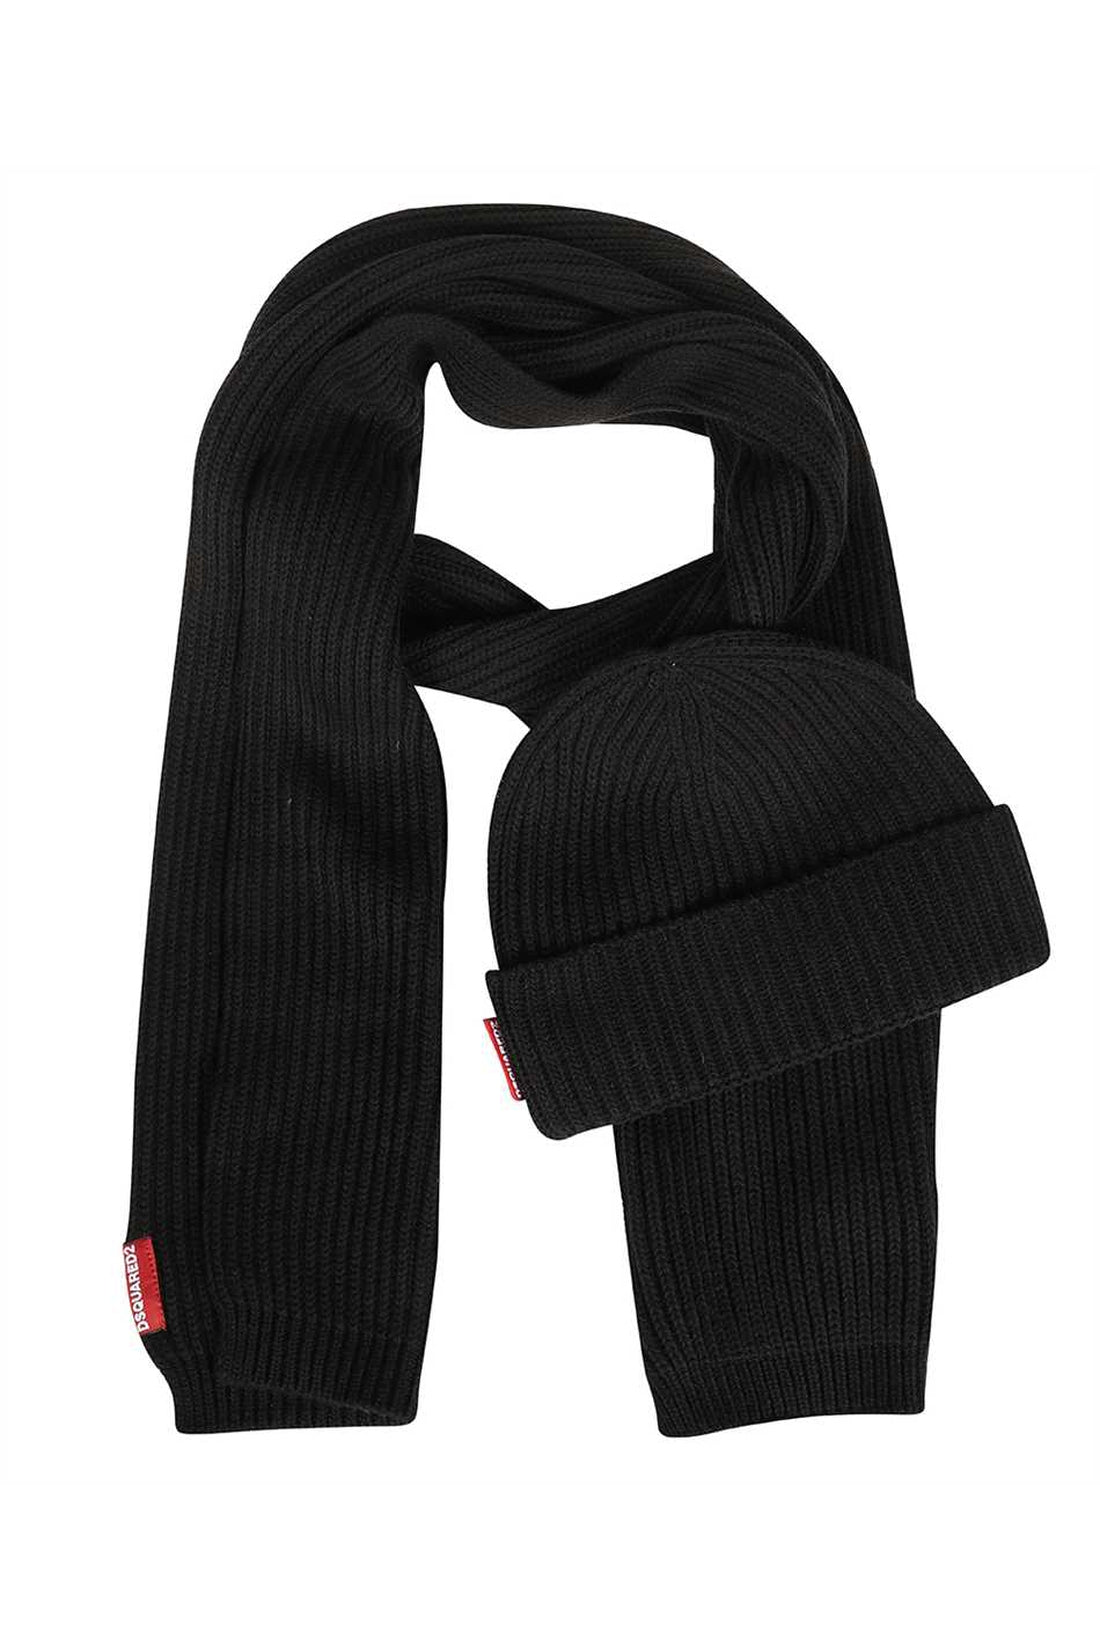 Dsquared2-OUTLET-SALE-Hat and scarf set-ARCHIVIST